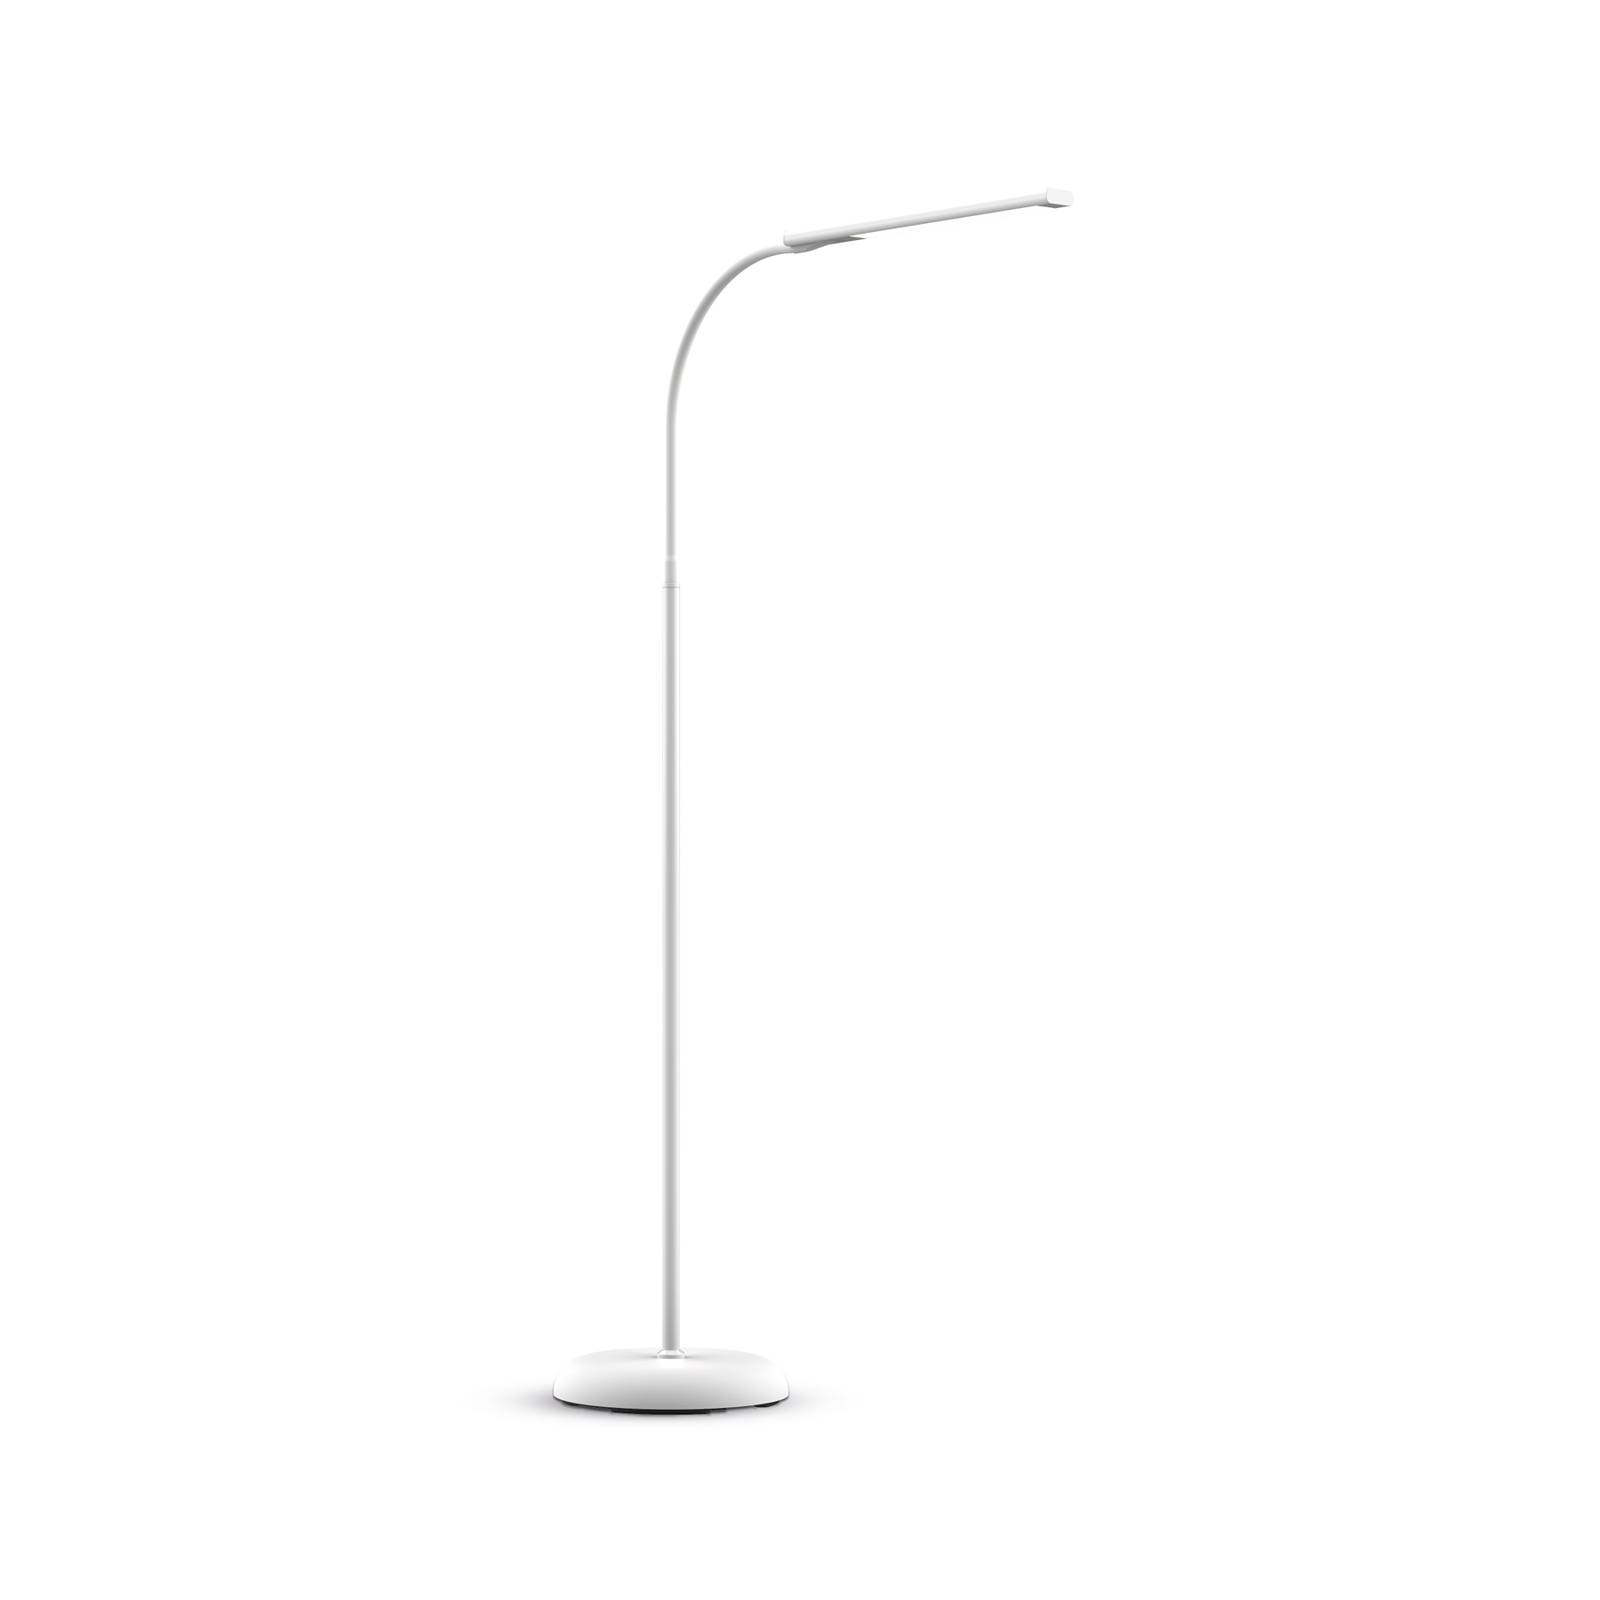 Image of Lampadaire LED MAULpirro dimmable, blanc 4002390077347